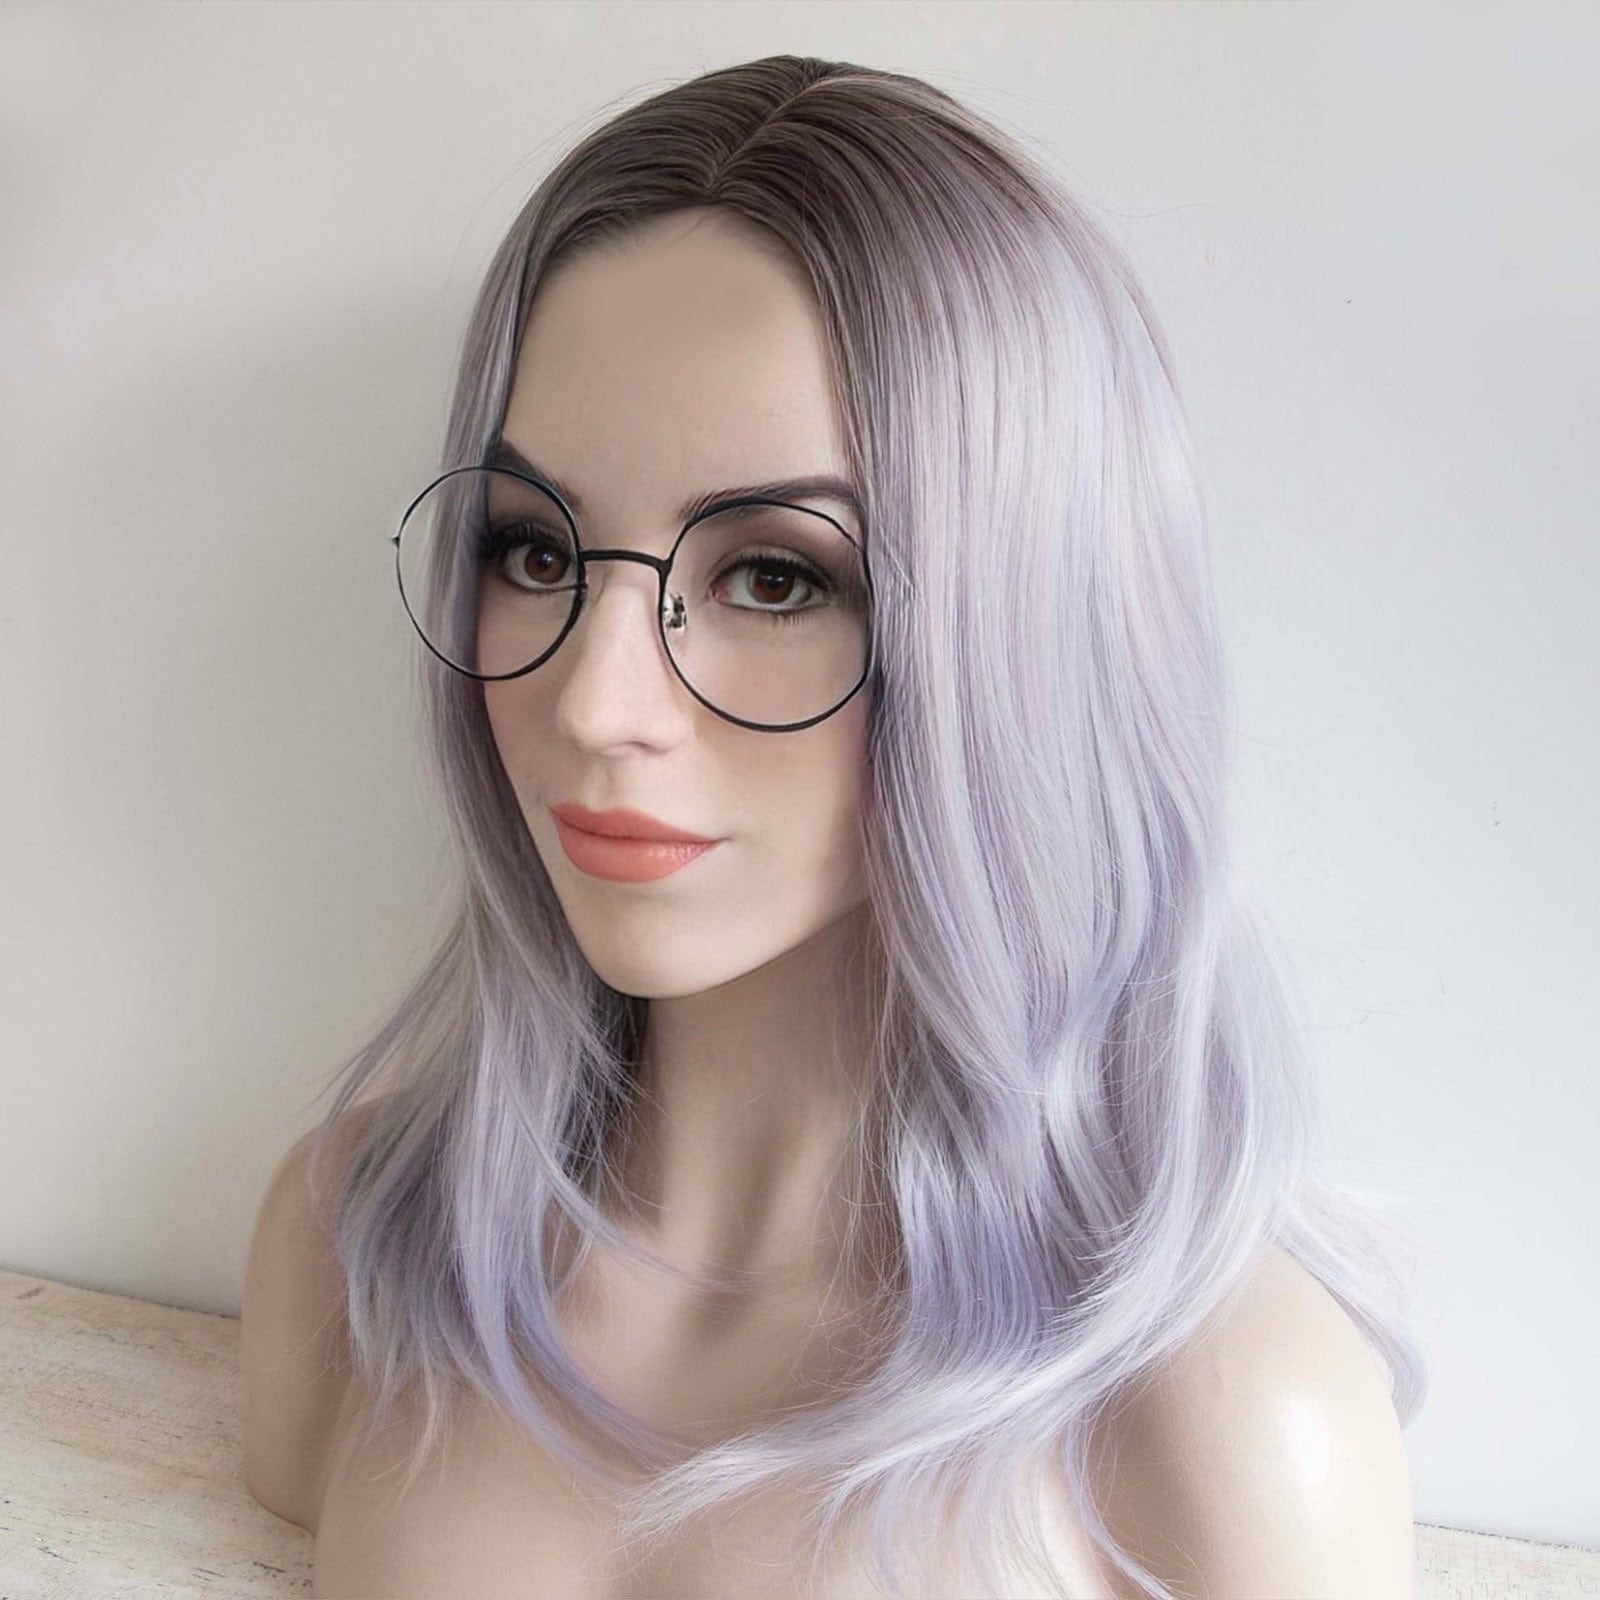 nevermindyrhead Women Silver Gray Light Purple Shades Ombre Dark Root Long Straight Hair Side Part Wig